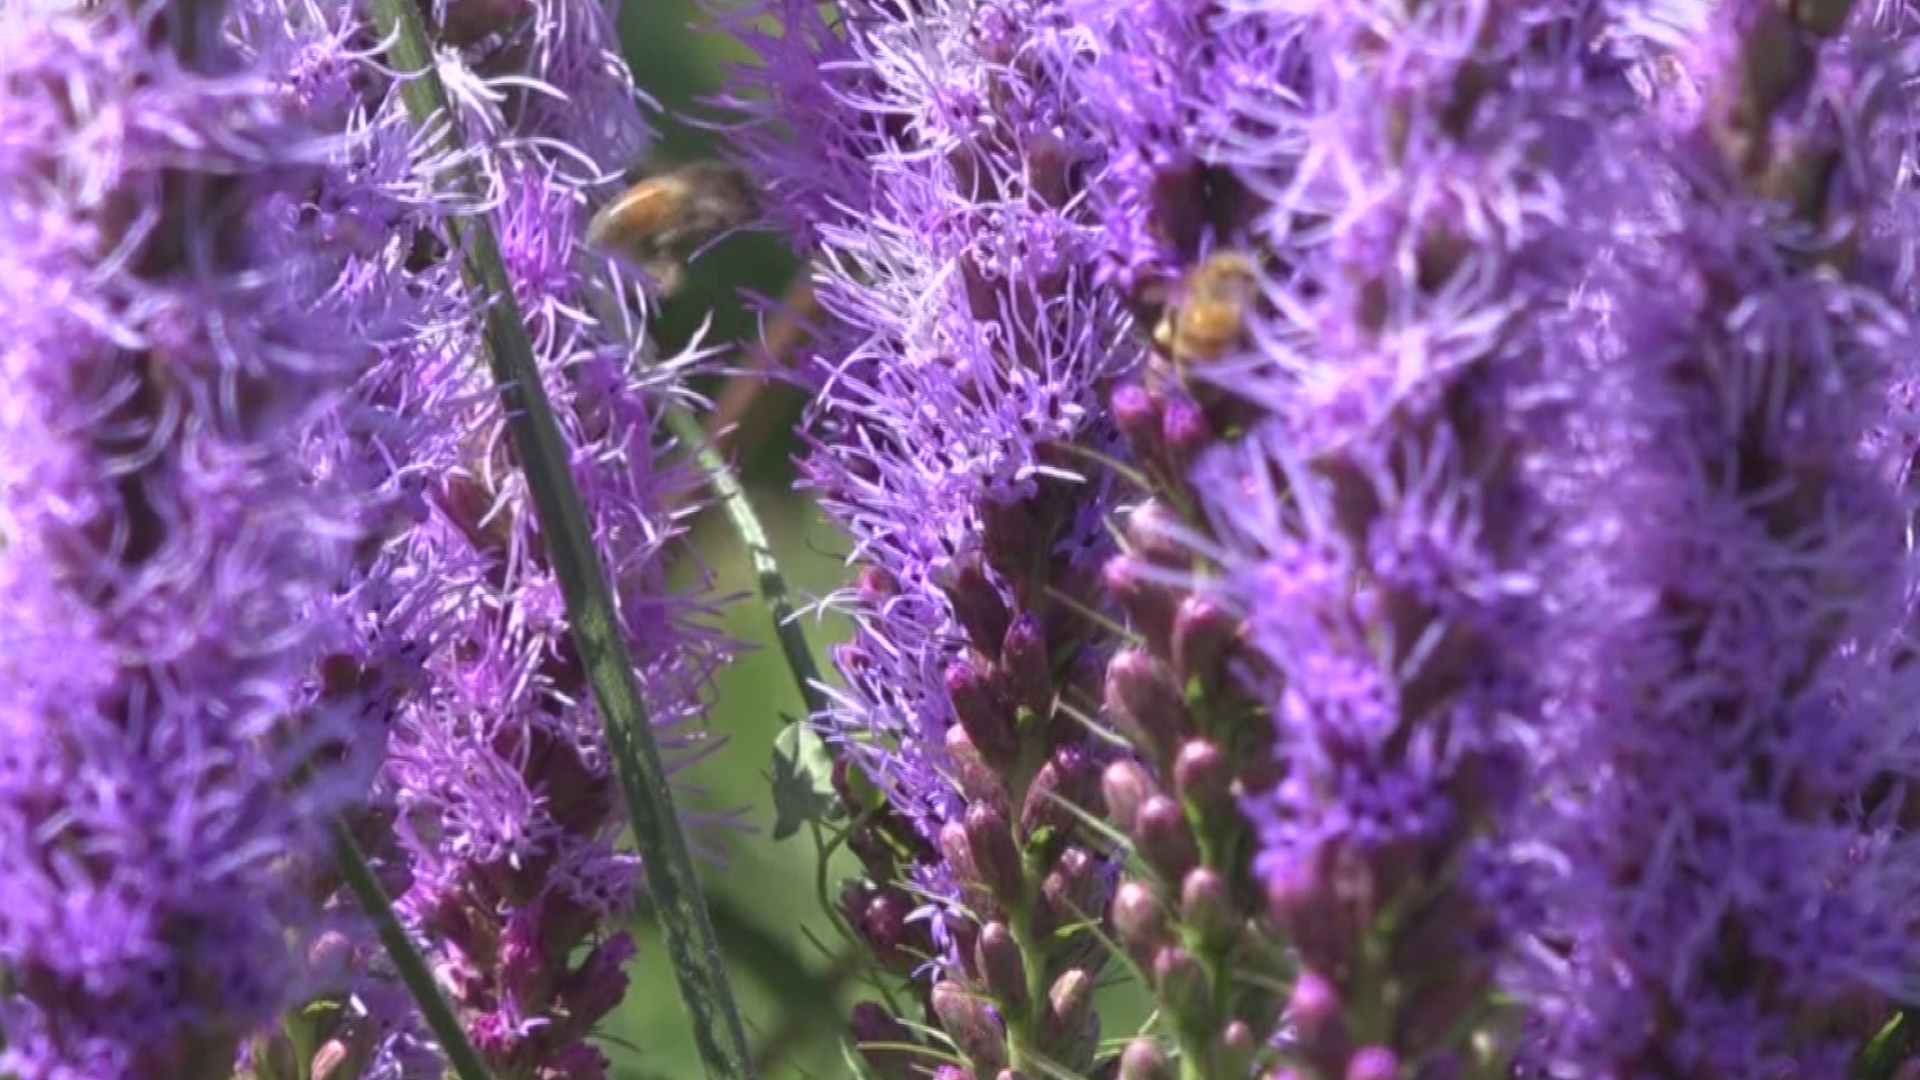 Post Falls man creates 'haven' to conserve bees